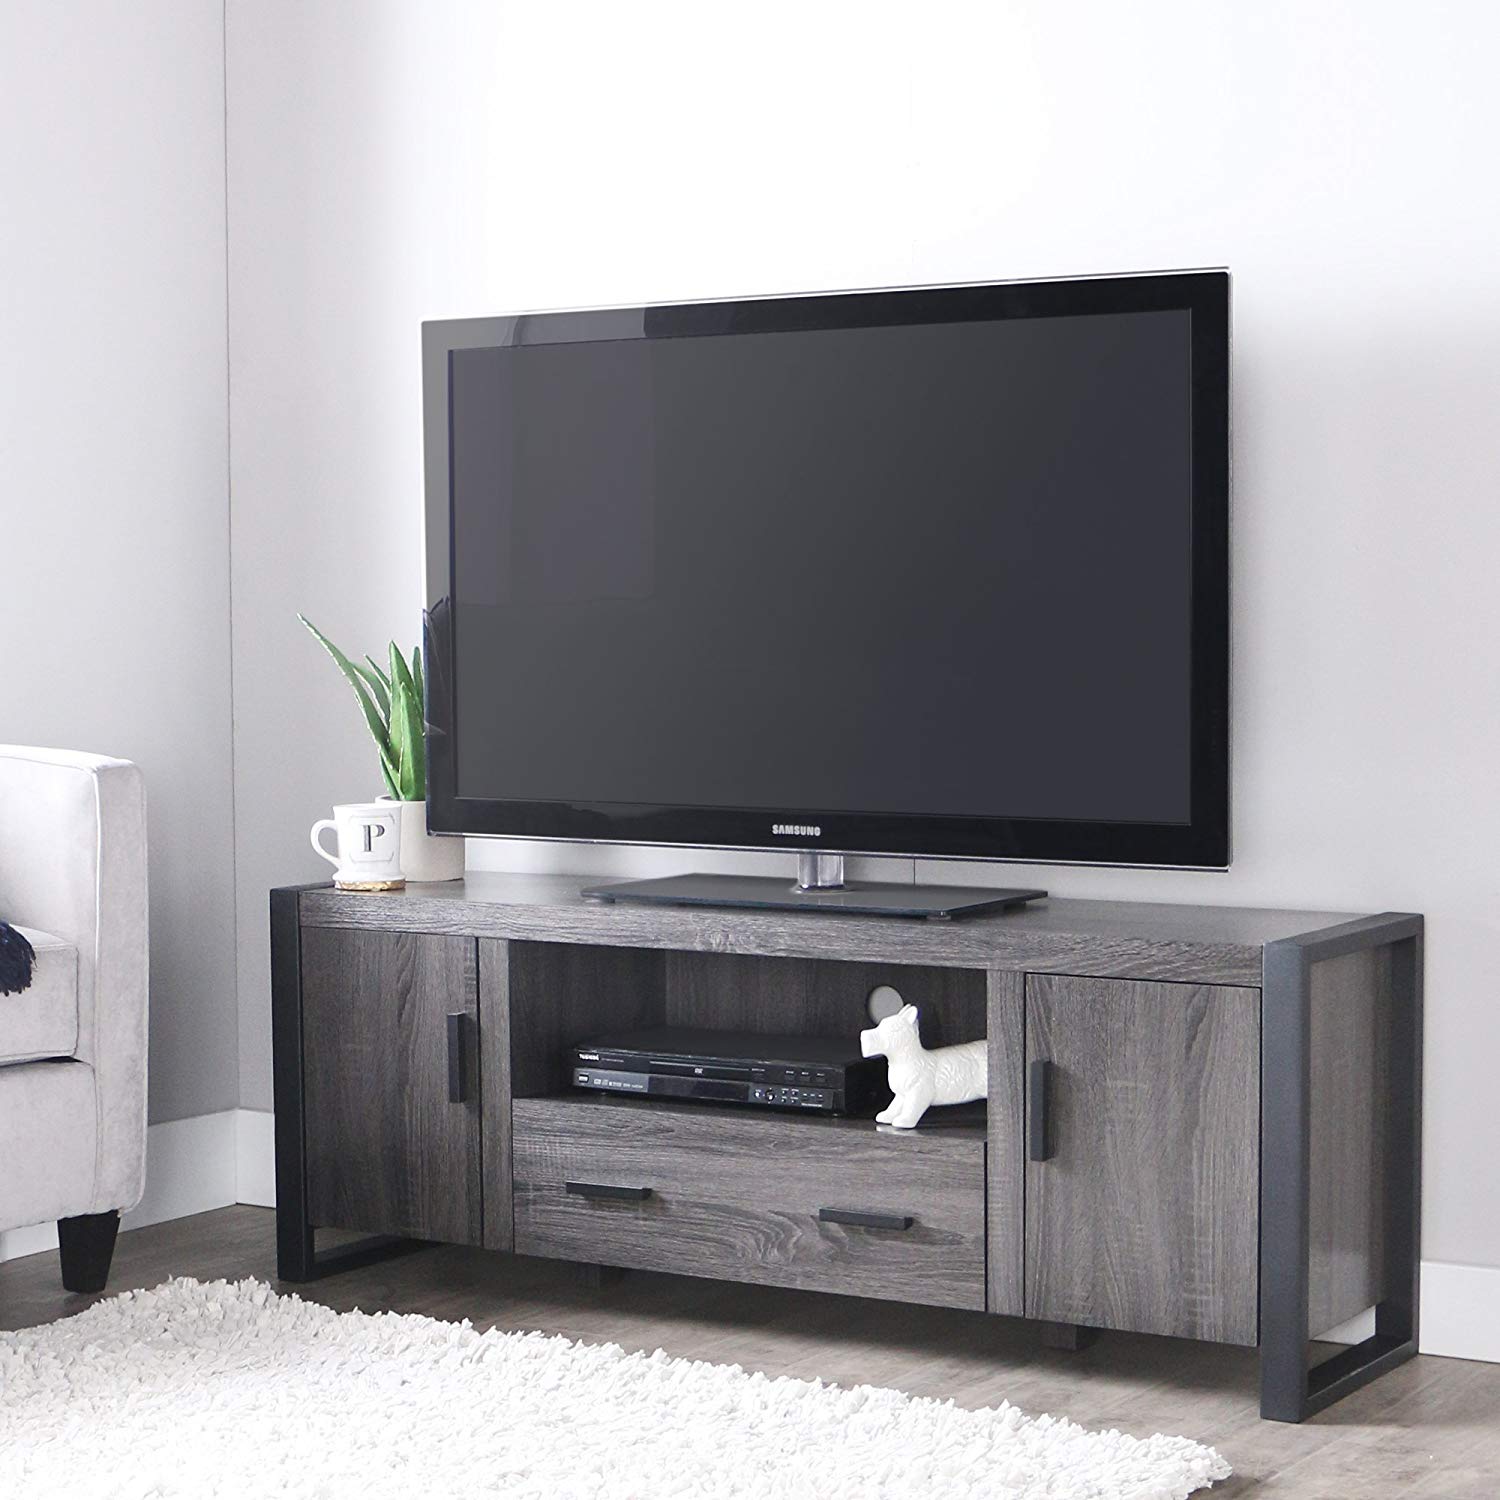 60 Inch Tv Stand with Fireplace Fresh Amazon New 60" Modern Industrial Tv Stand Console